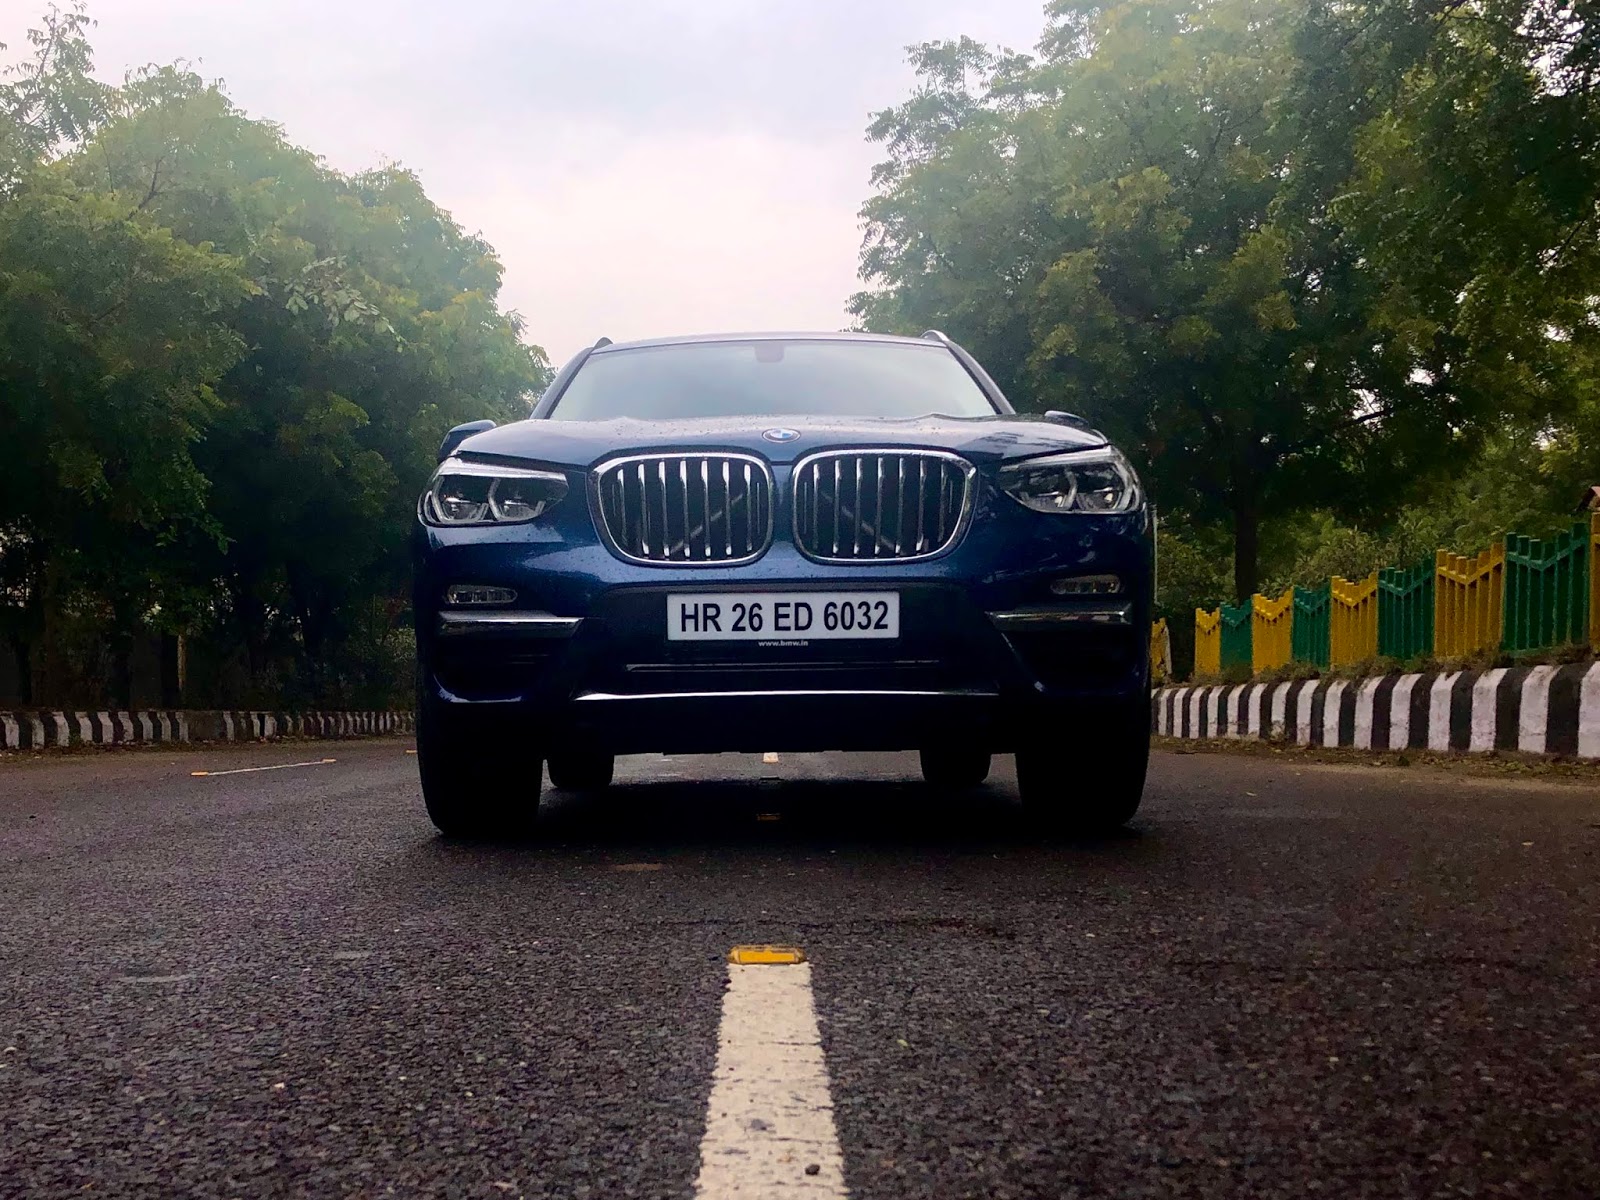 The BMW X3 xDrive20d front